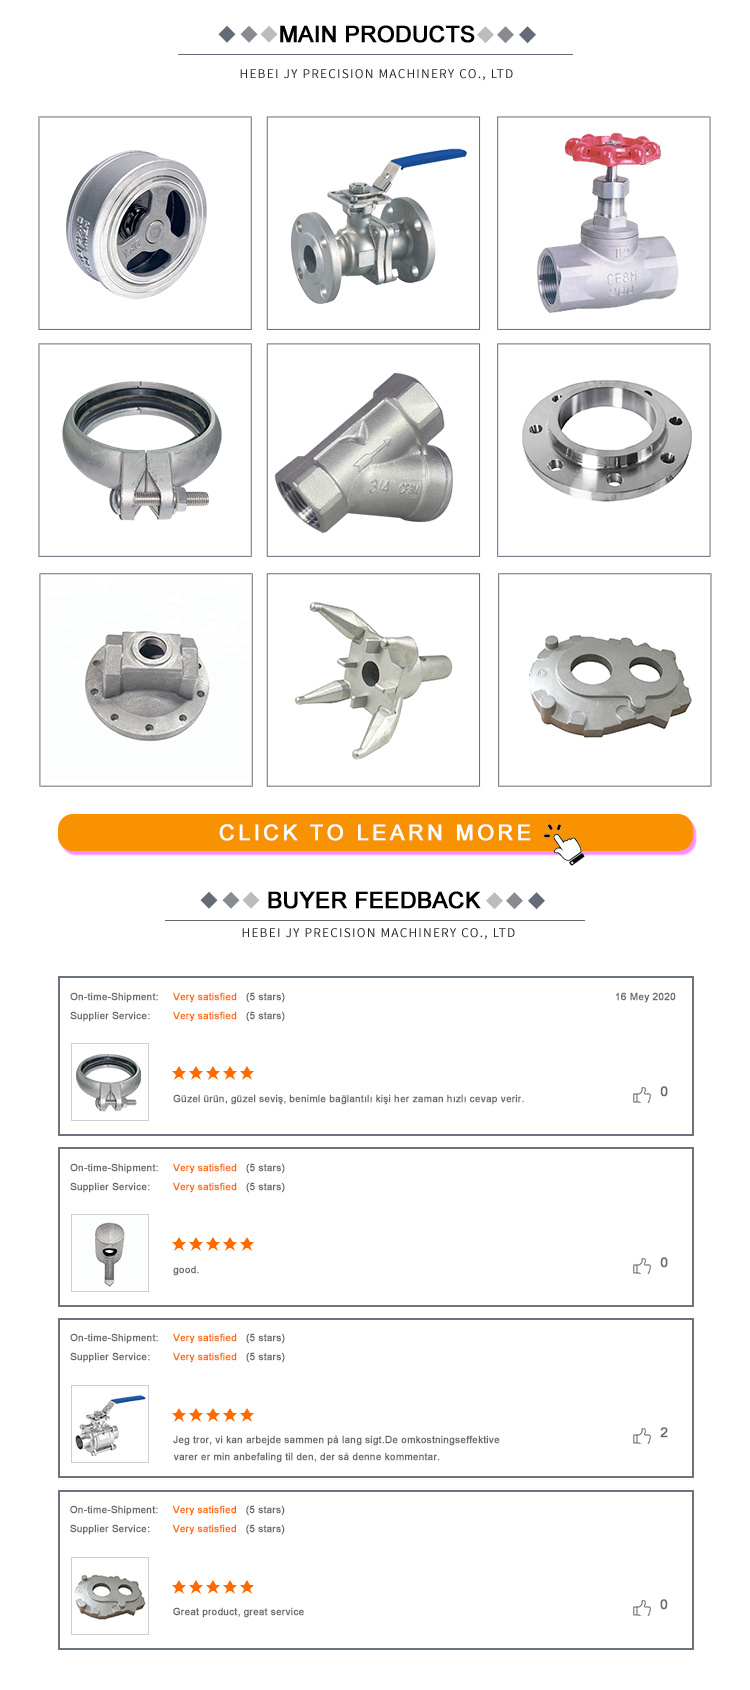 OEM Hook Part Products Investment Casting Wax Construction Machinery Accessories Lost Wax Casting